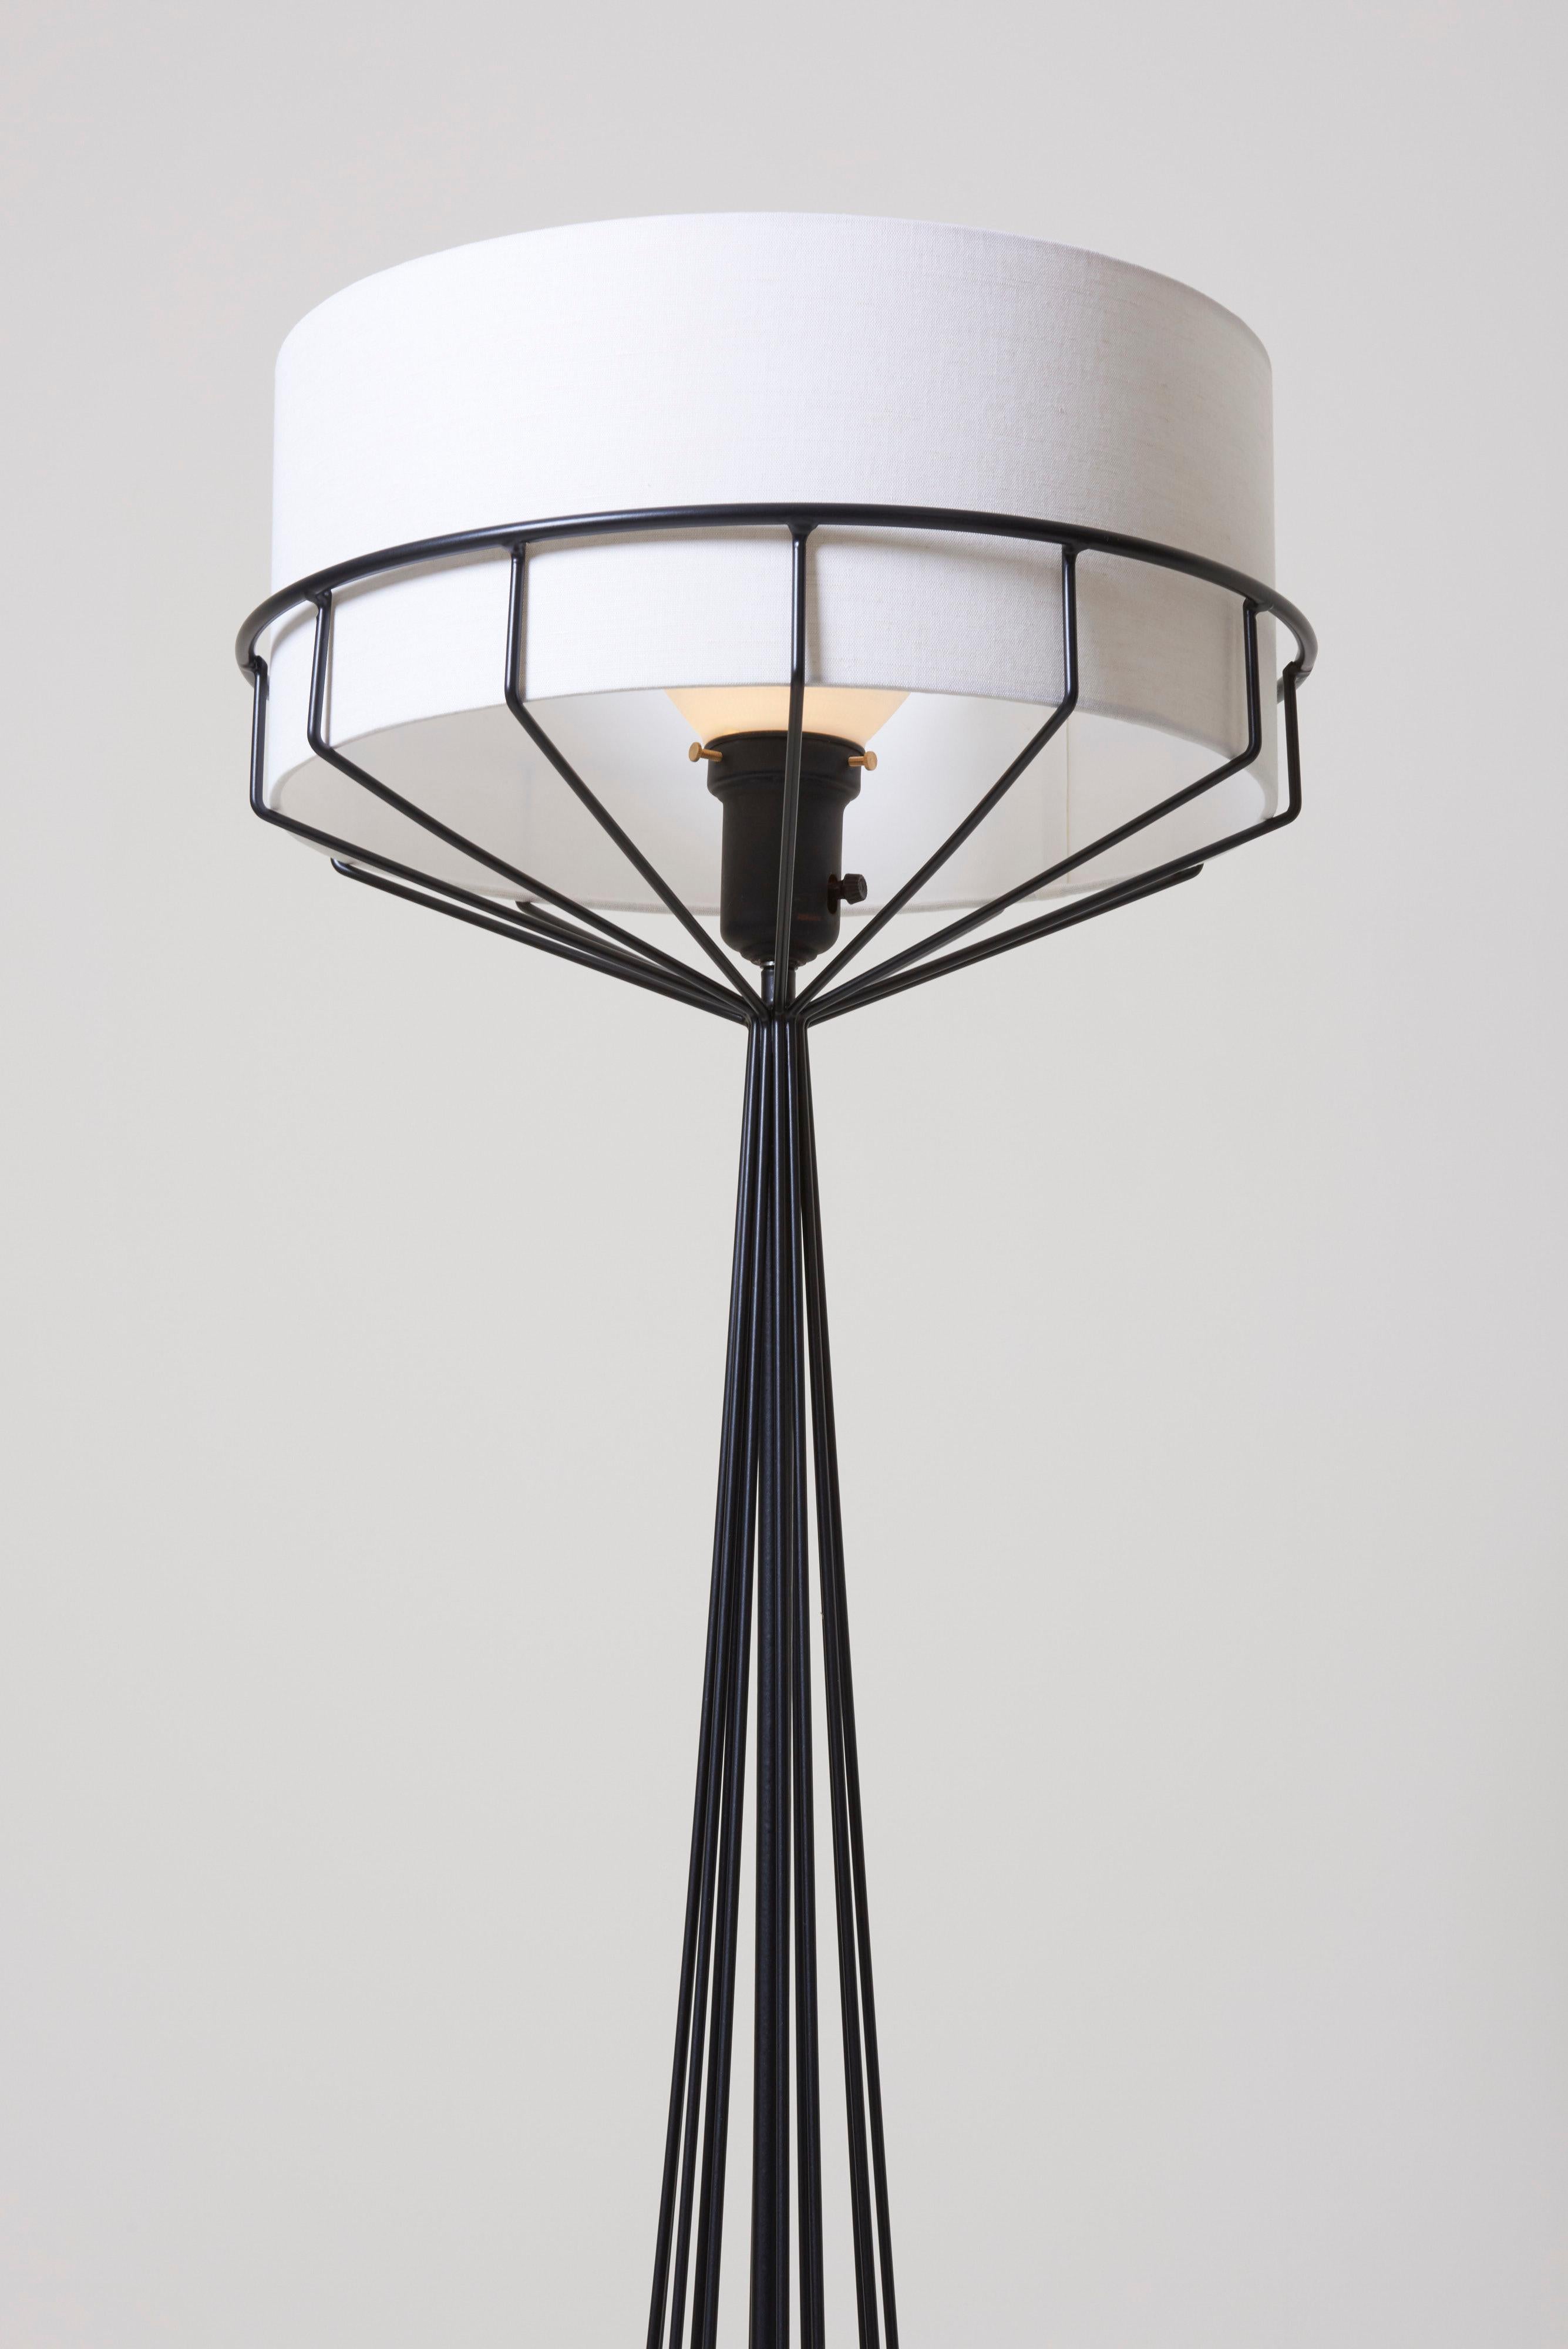 Restored Tony Paul floor lamp with original inner glass shade and new outer fabric shade.
A very sculptural lamp. One model A / E27 bulb.
To be on the safe side, the lamp should be checked locally by a specialist concerning local requirements.

